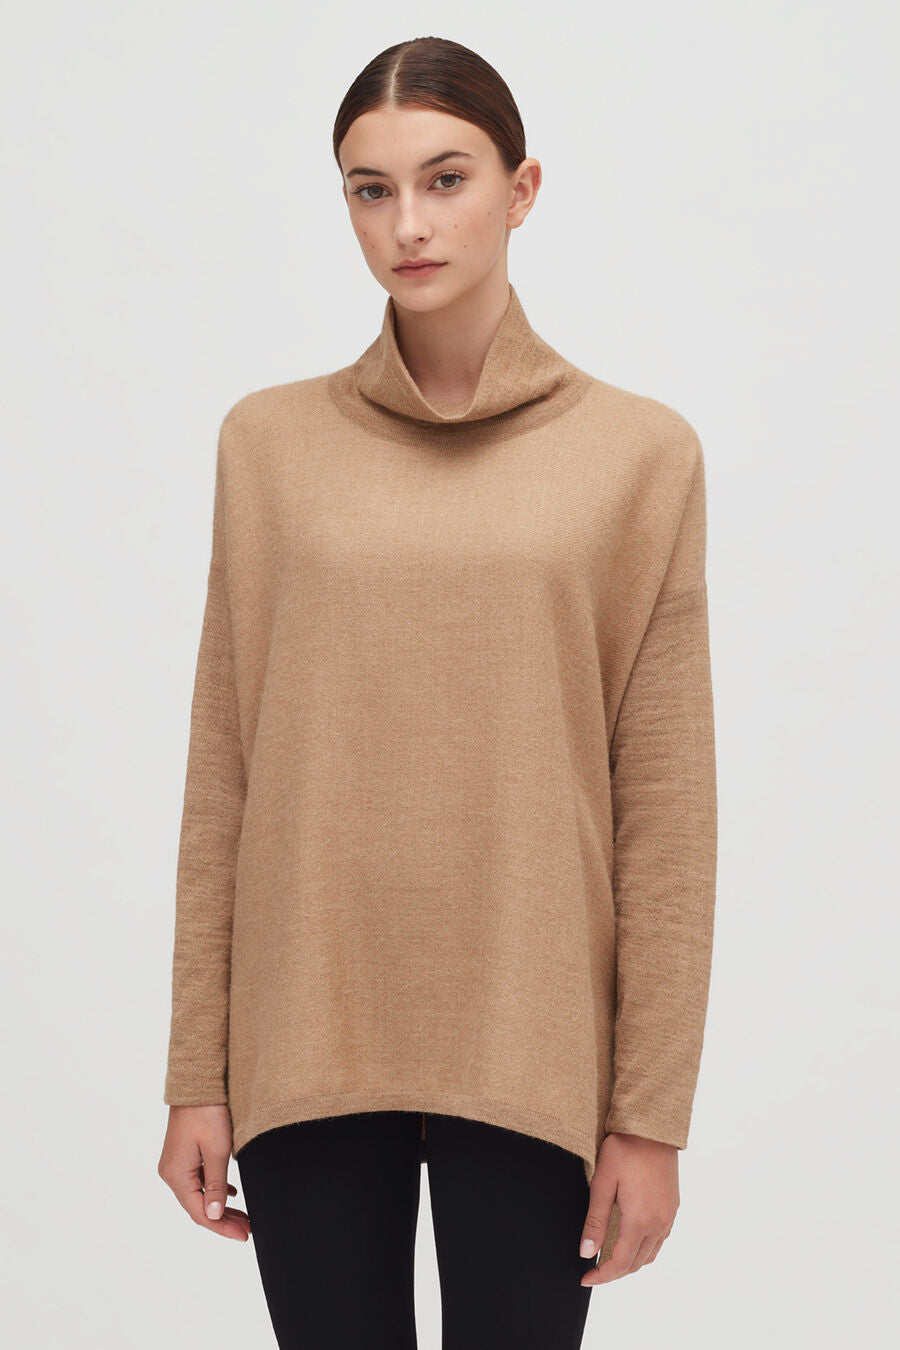 Woman wearing a turtleneck sweater standing straight with a neutral expression.